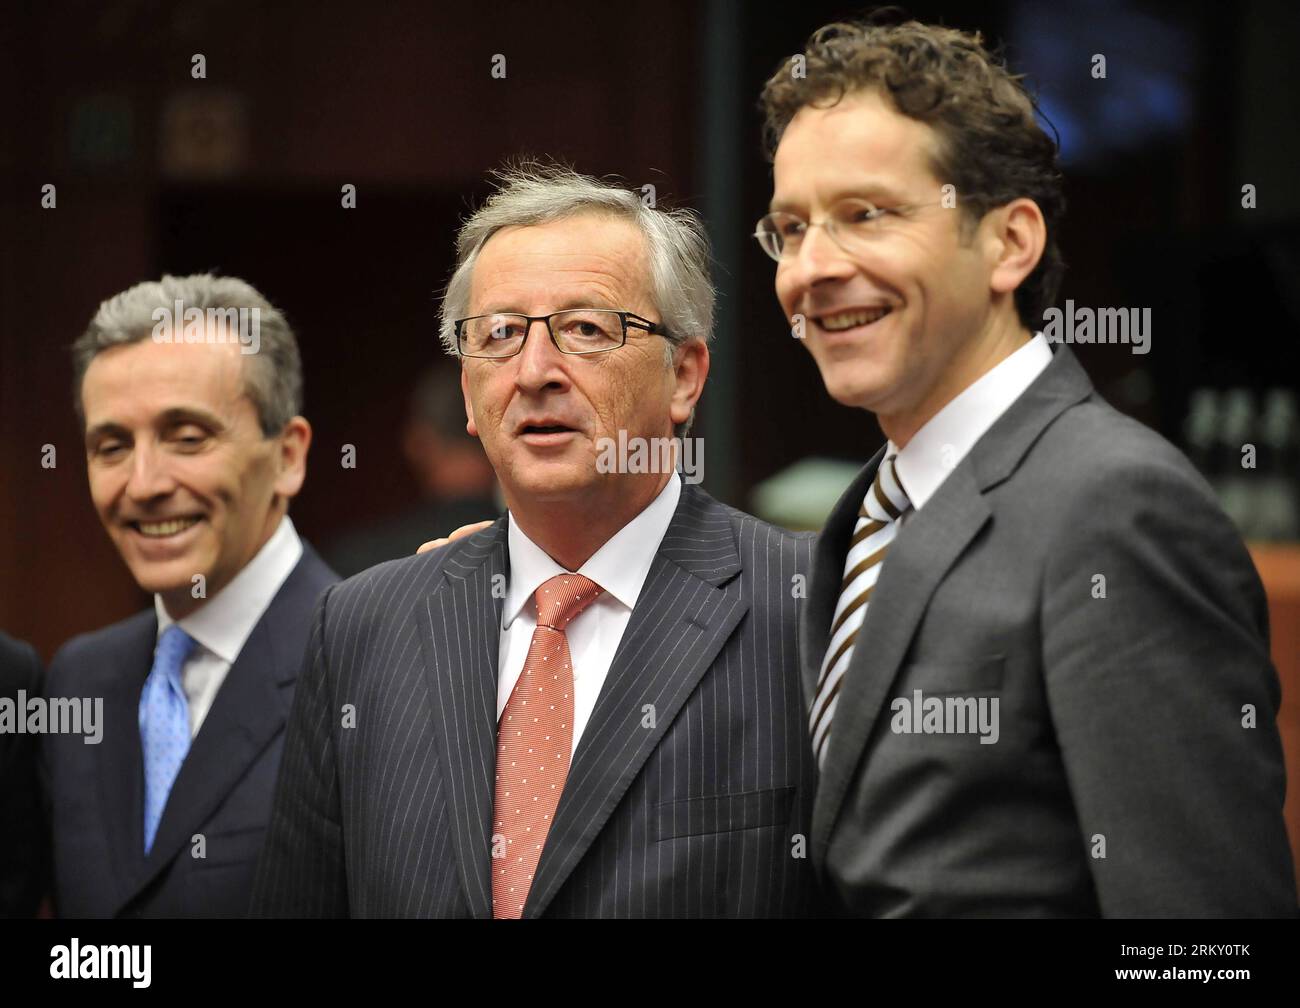 Bildnummer: 59114597  Datum: 21.01.2013  Copyright: imago/Xinhua (130121) -- BRUSSELS, Jan. 21, 2013 (Xinhua) -- Italian minister of Economy and Finance Vittorio Grilli, Luxembourg s Prime Minister and Eurogroup President Jean-Claude Juncker and Dutch Finance Minister Jeroen Dijsselbloem (L to R) pose for photos before a Eurogroup financial ministers meeting at the EU headquarters in Brussels, capital of Belgium, Jan. 21, 2013. The new president of the Eurogroup to replace outgoing leader Jean-Claude Juncker will be appointed during the meeting, and Dijsselbloem is the only established candida Stock Photo